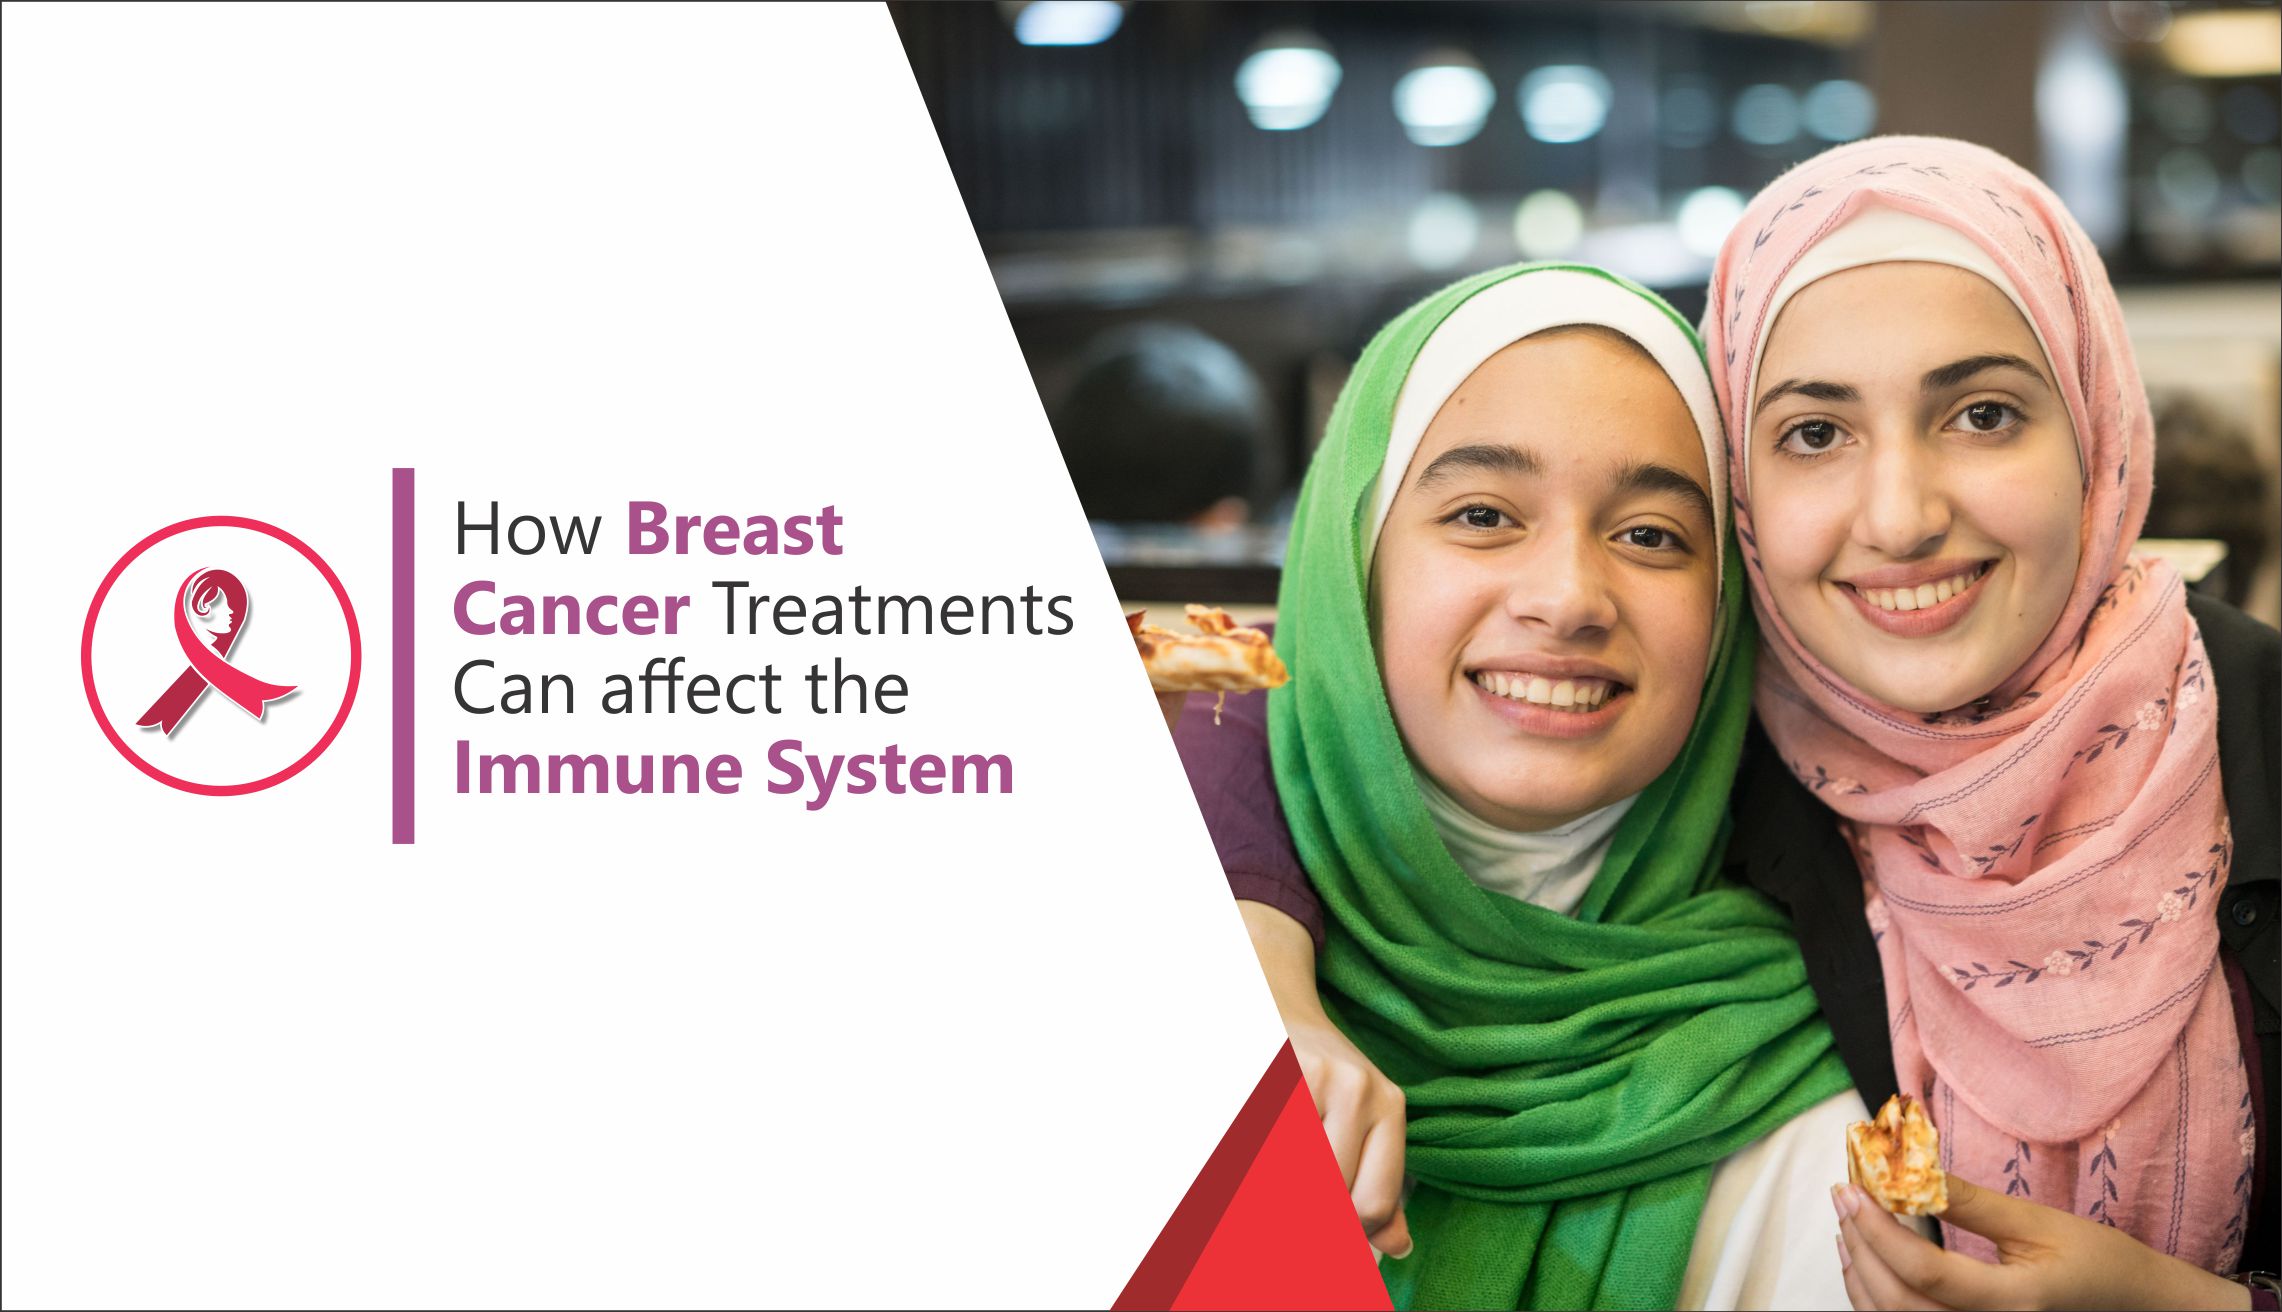 How Breast Cancer Treatments Can Affect the Immune System